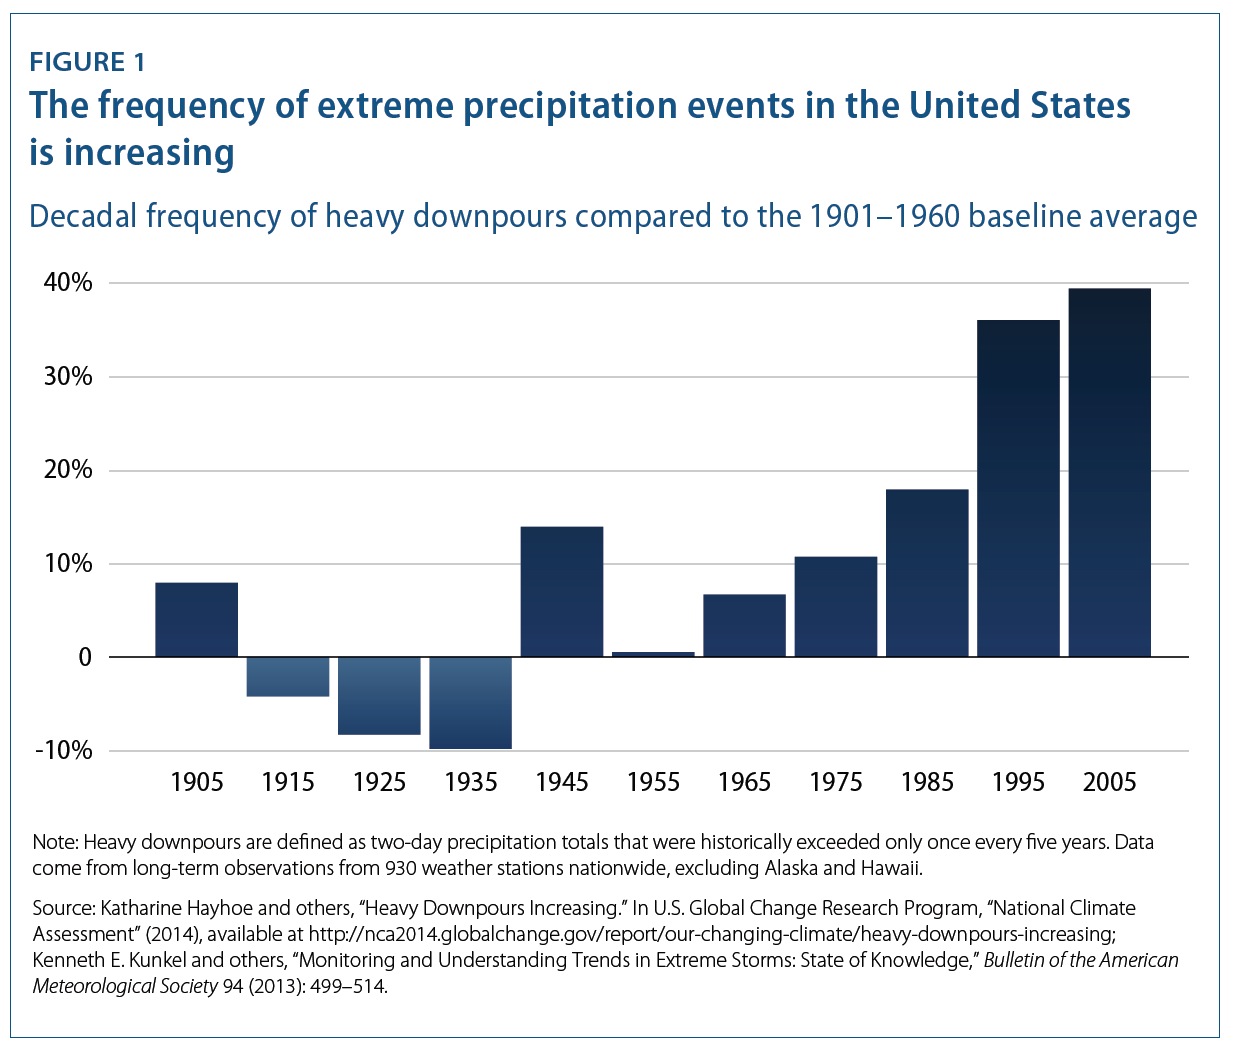 The frequency of extreme precipitation events in the United States is increasing